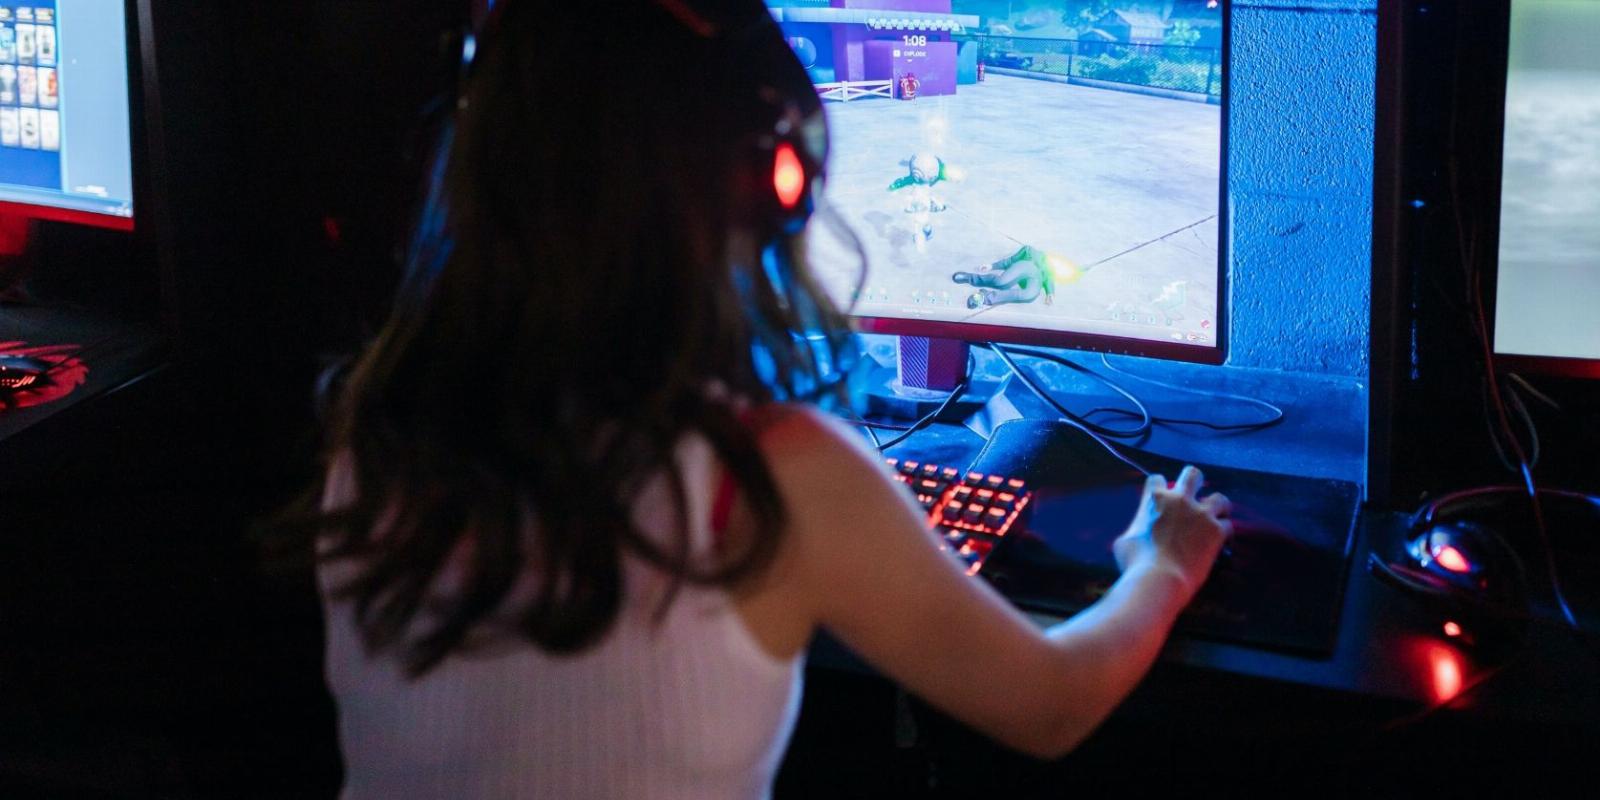 6 Ways to Deal With Rude Gamers